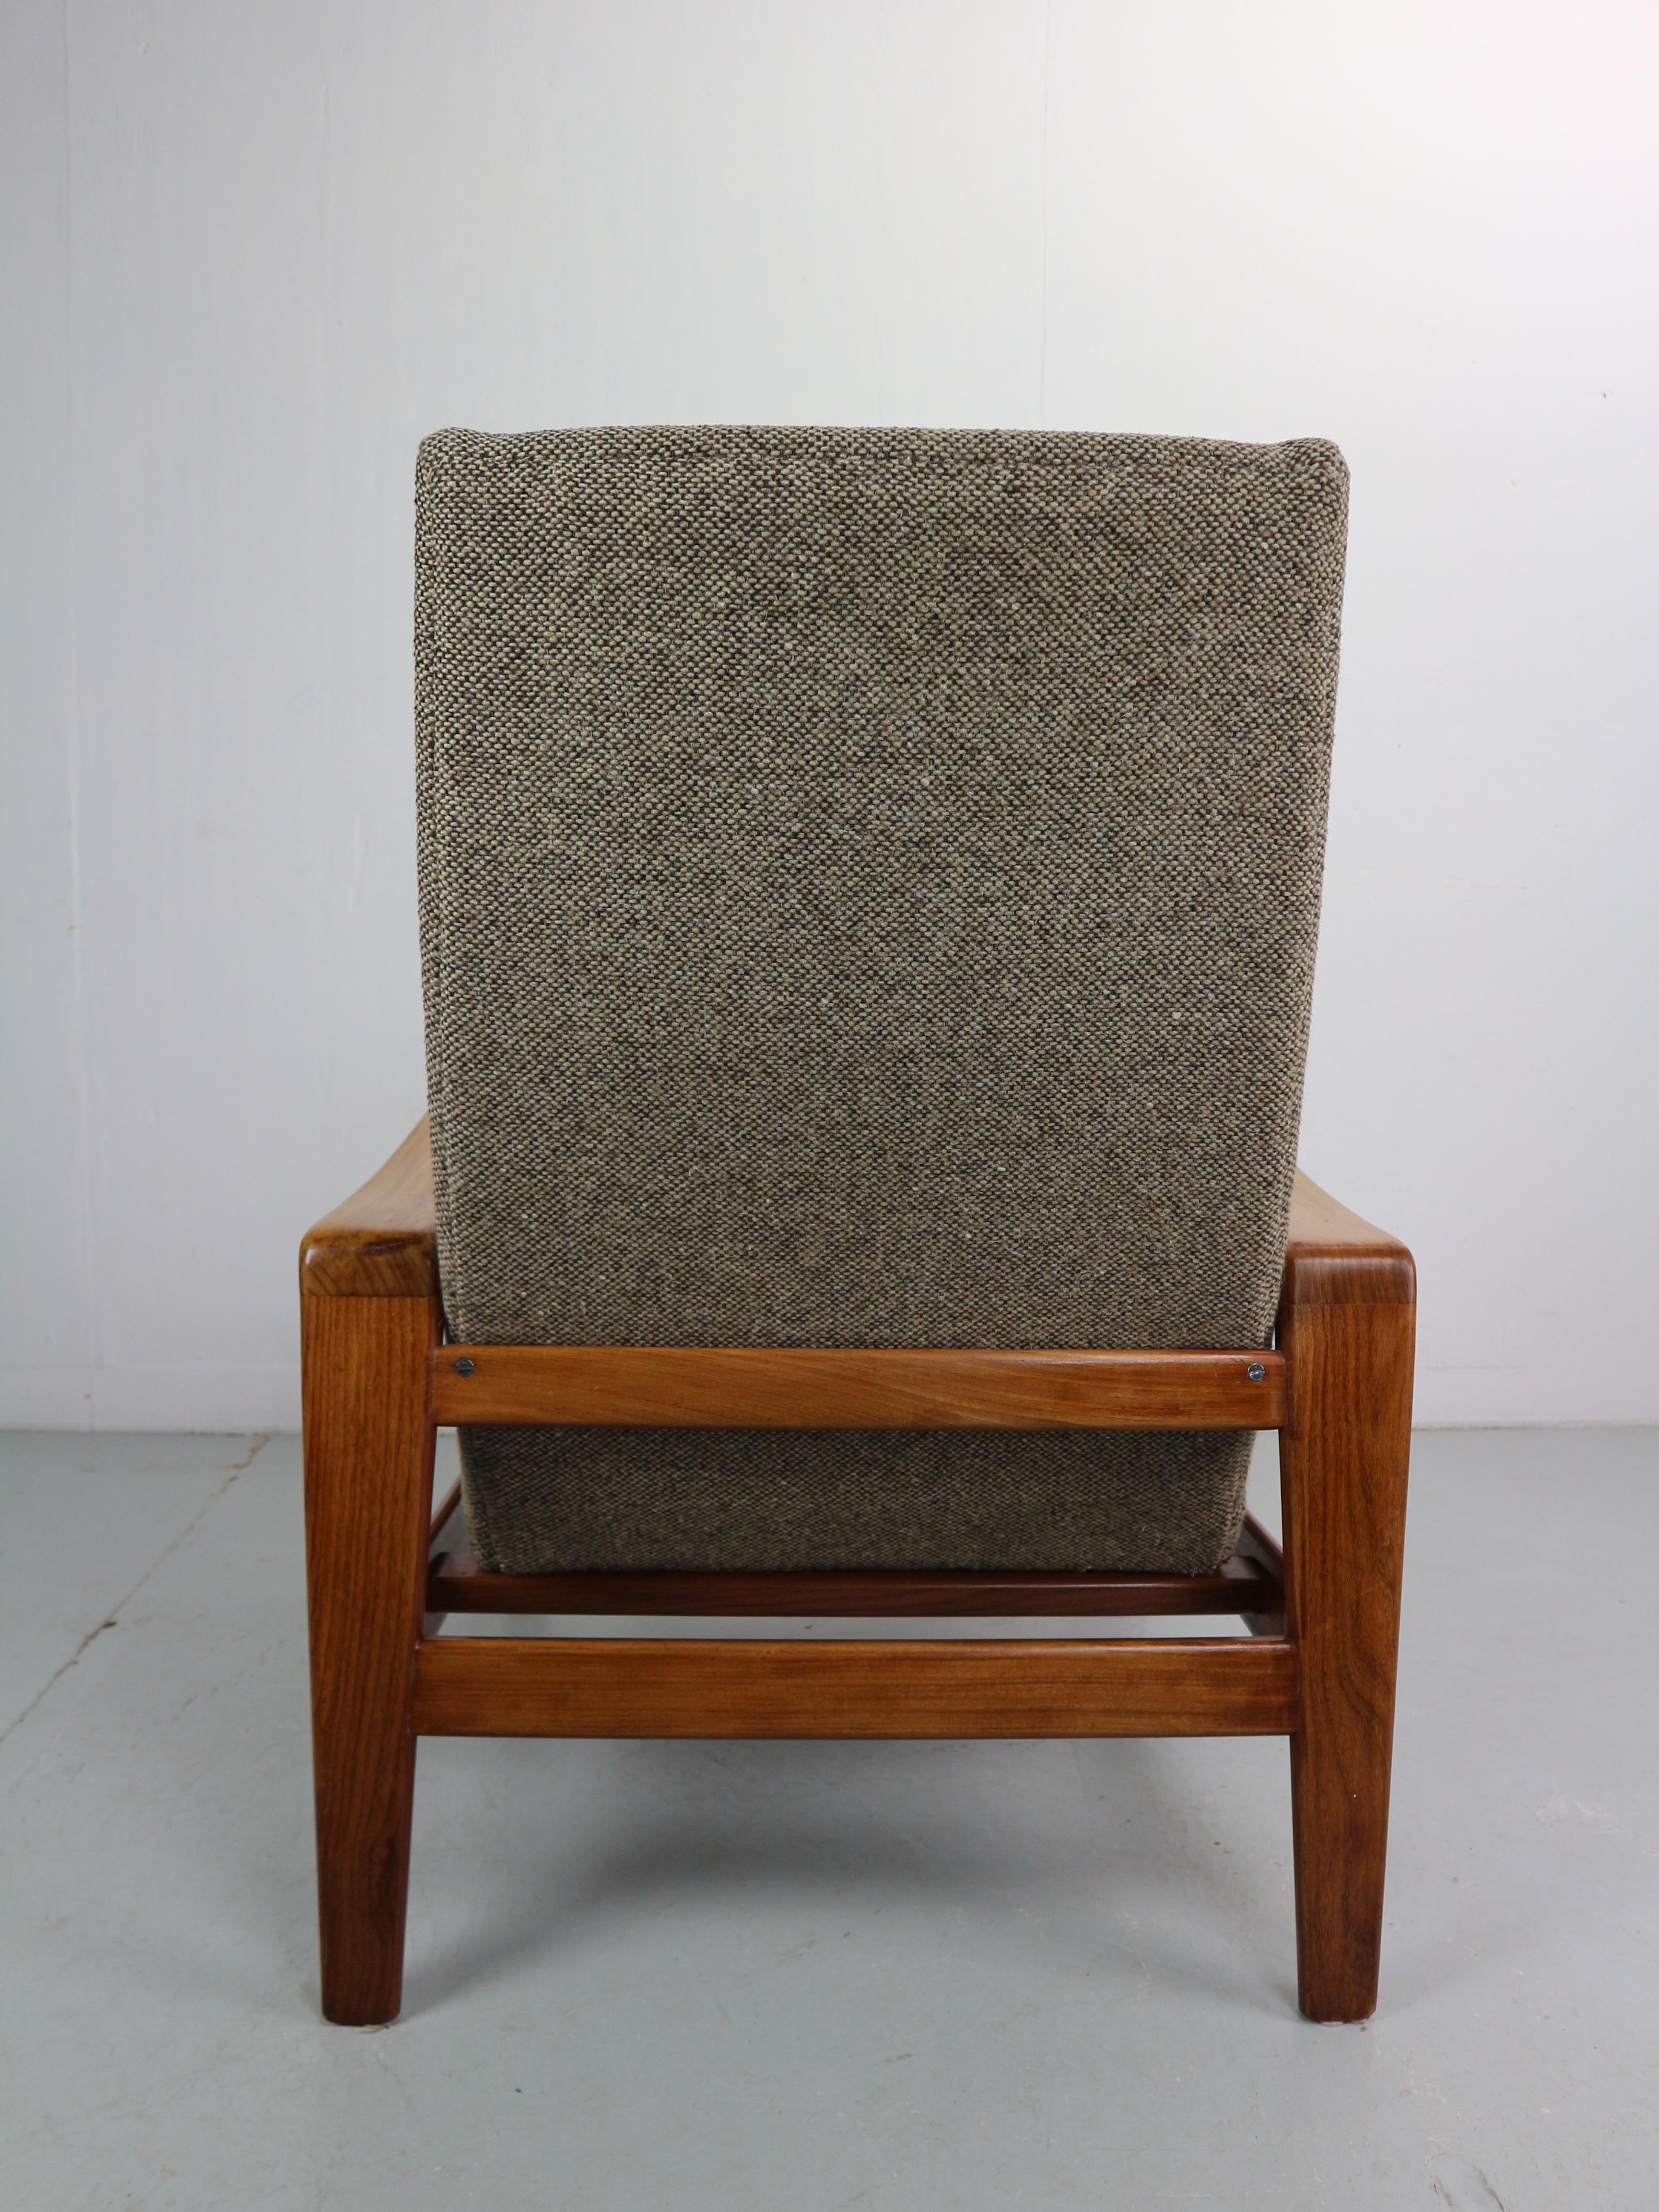 Lounge Chair by Arne Wahl Iversen for Komfort, 1960s For Sale 10